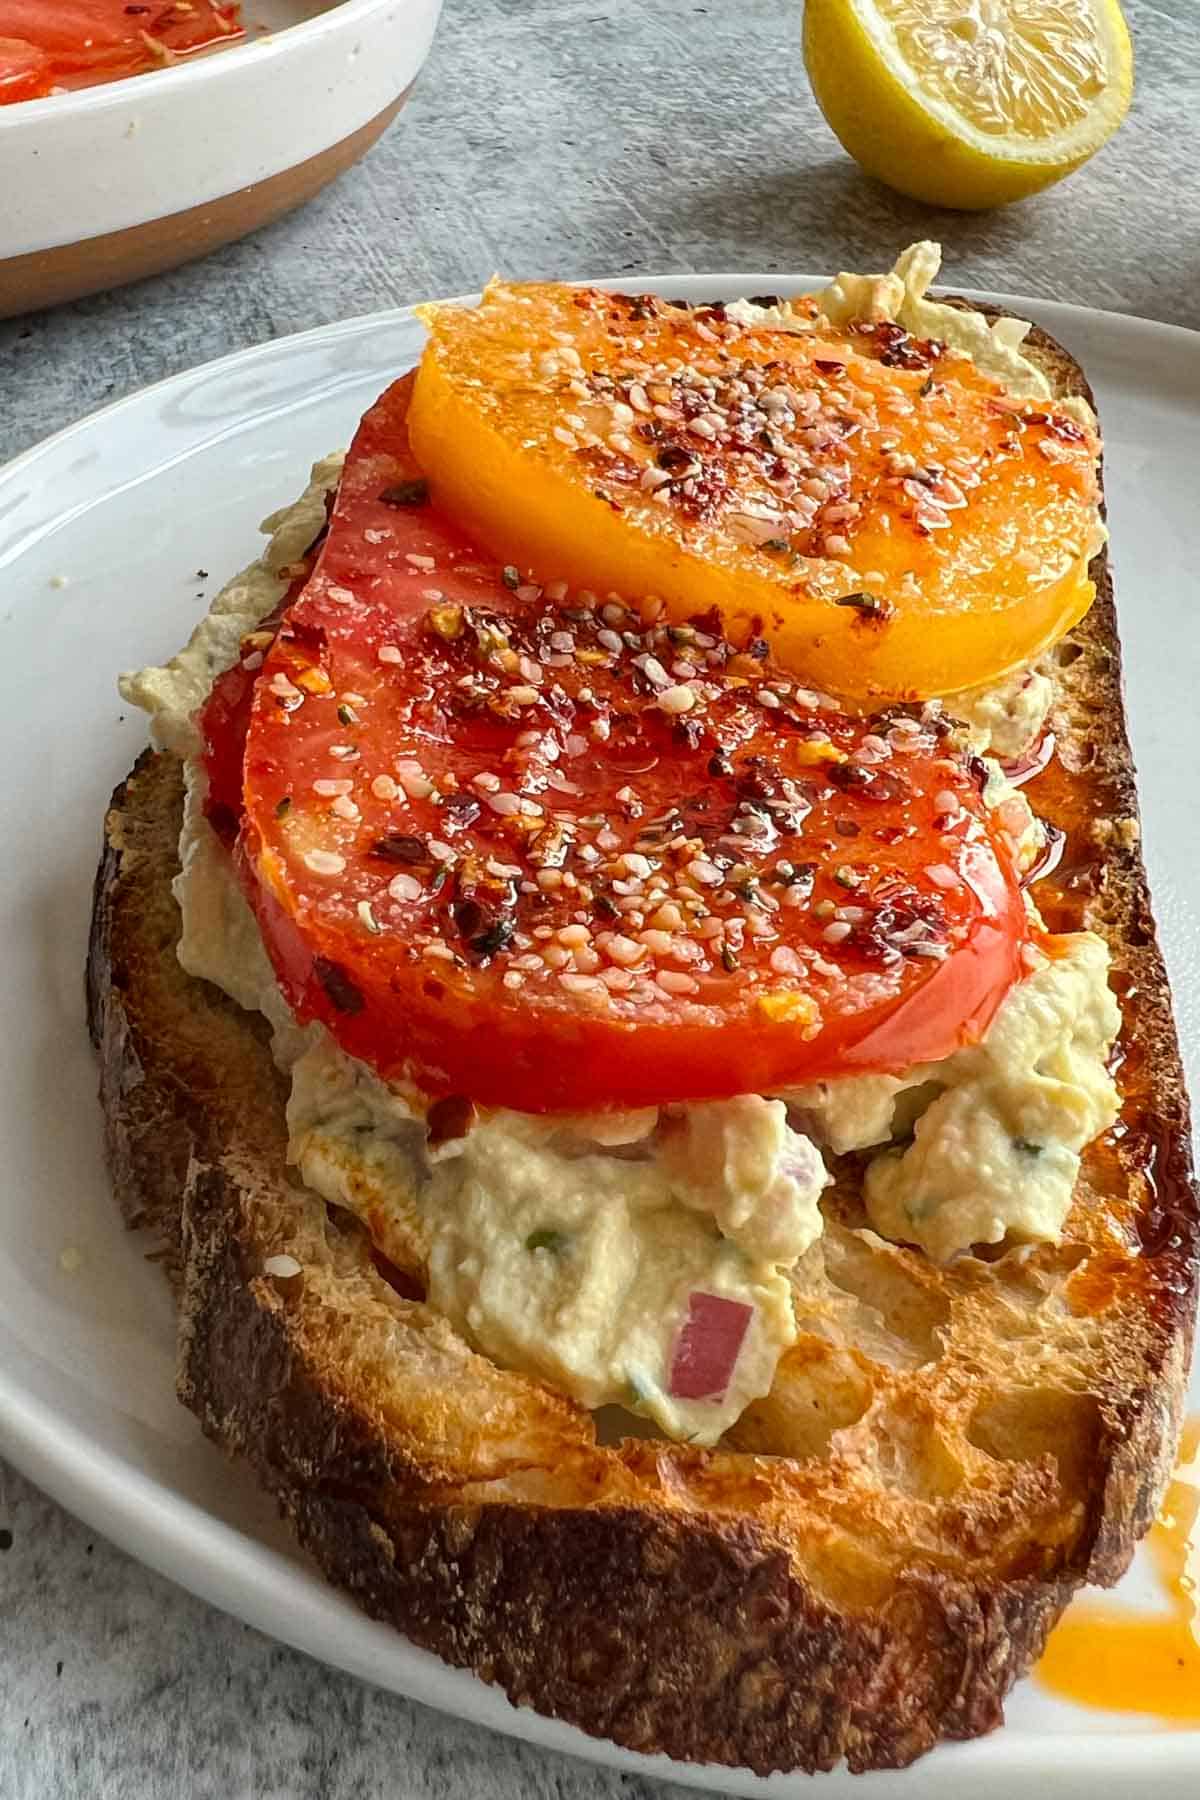 Vegan cream cheese with chives on sourdough toast with sliced tomatoes and chili crisp.